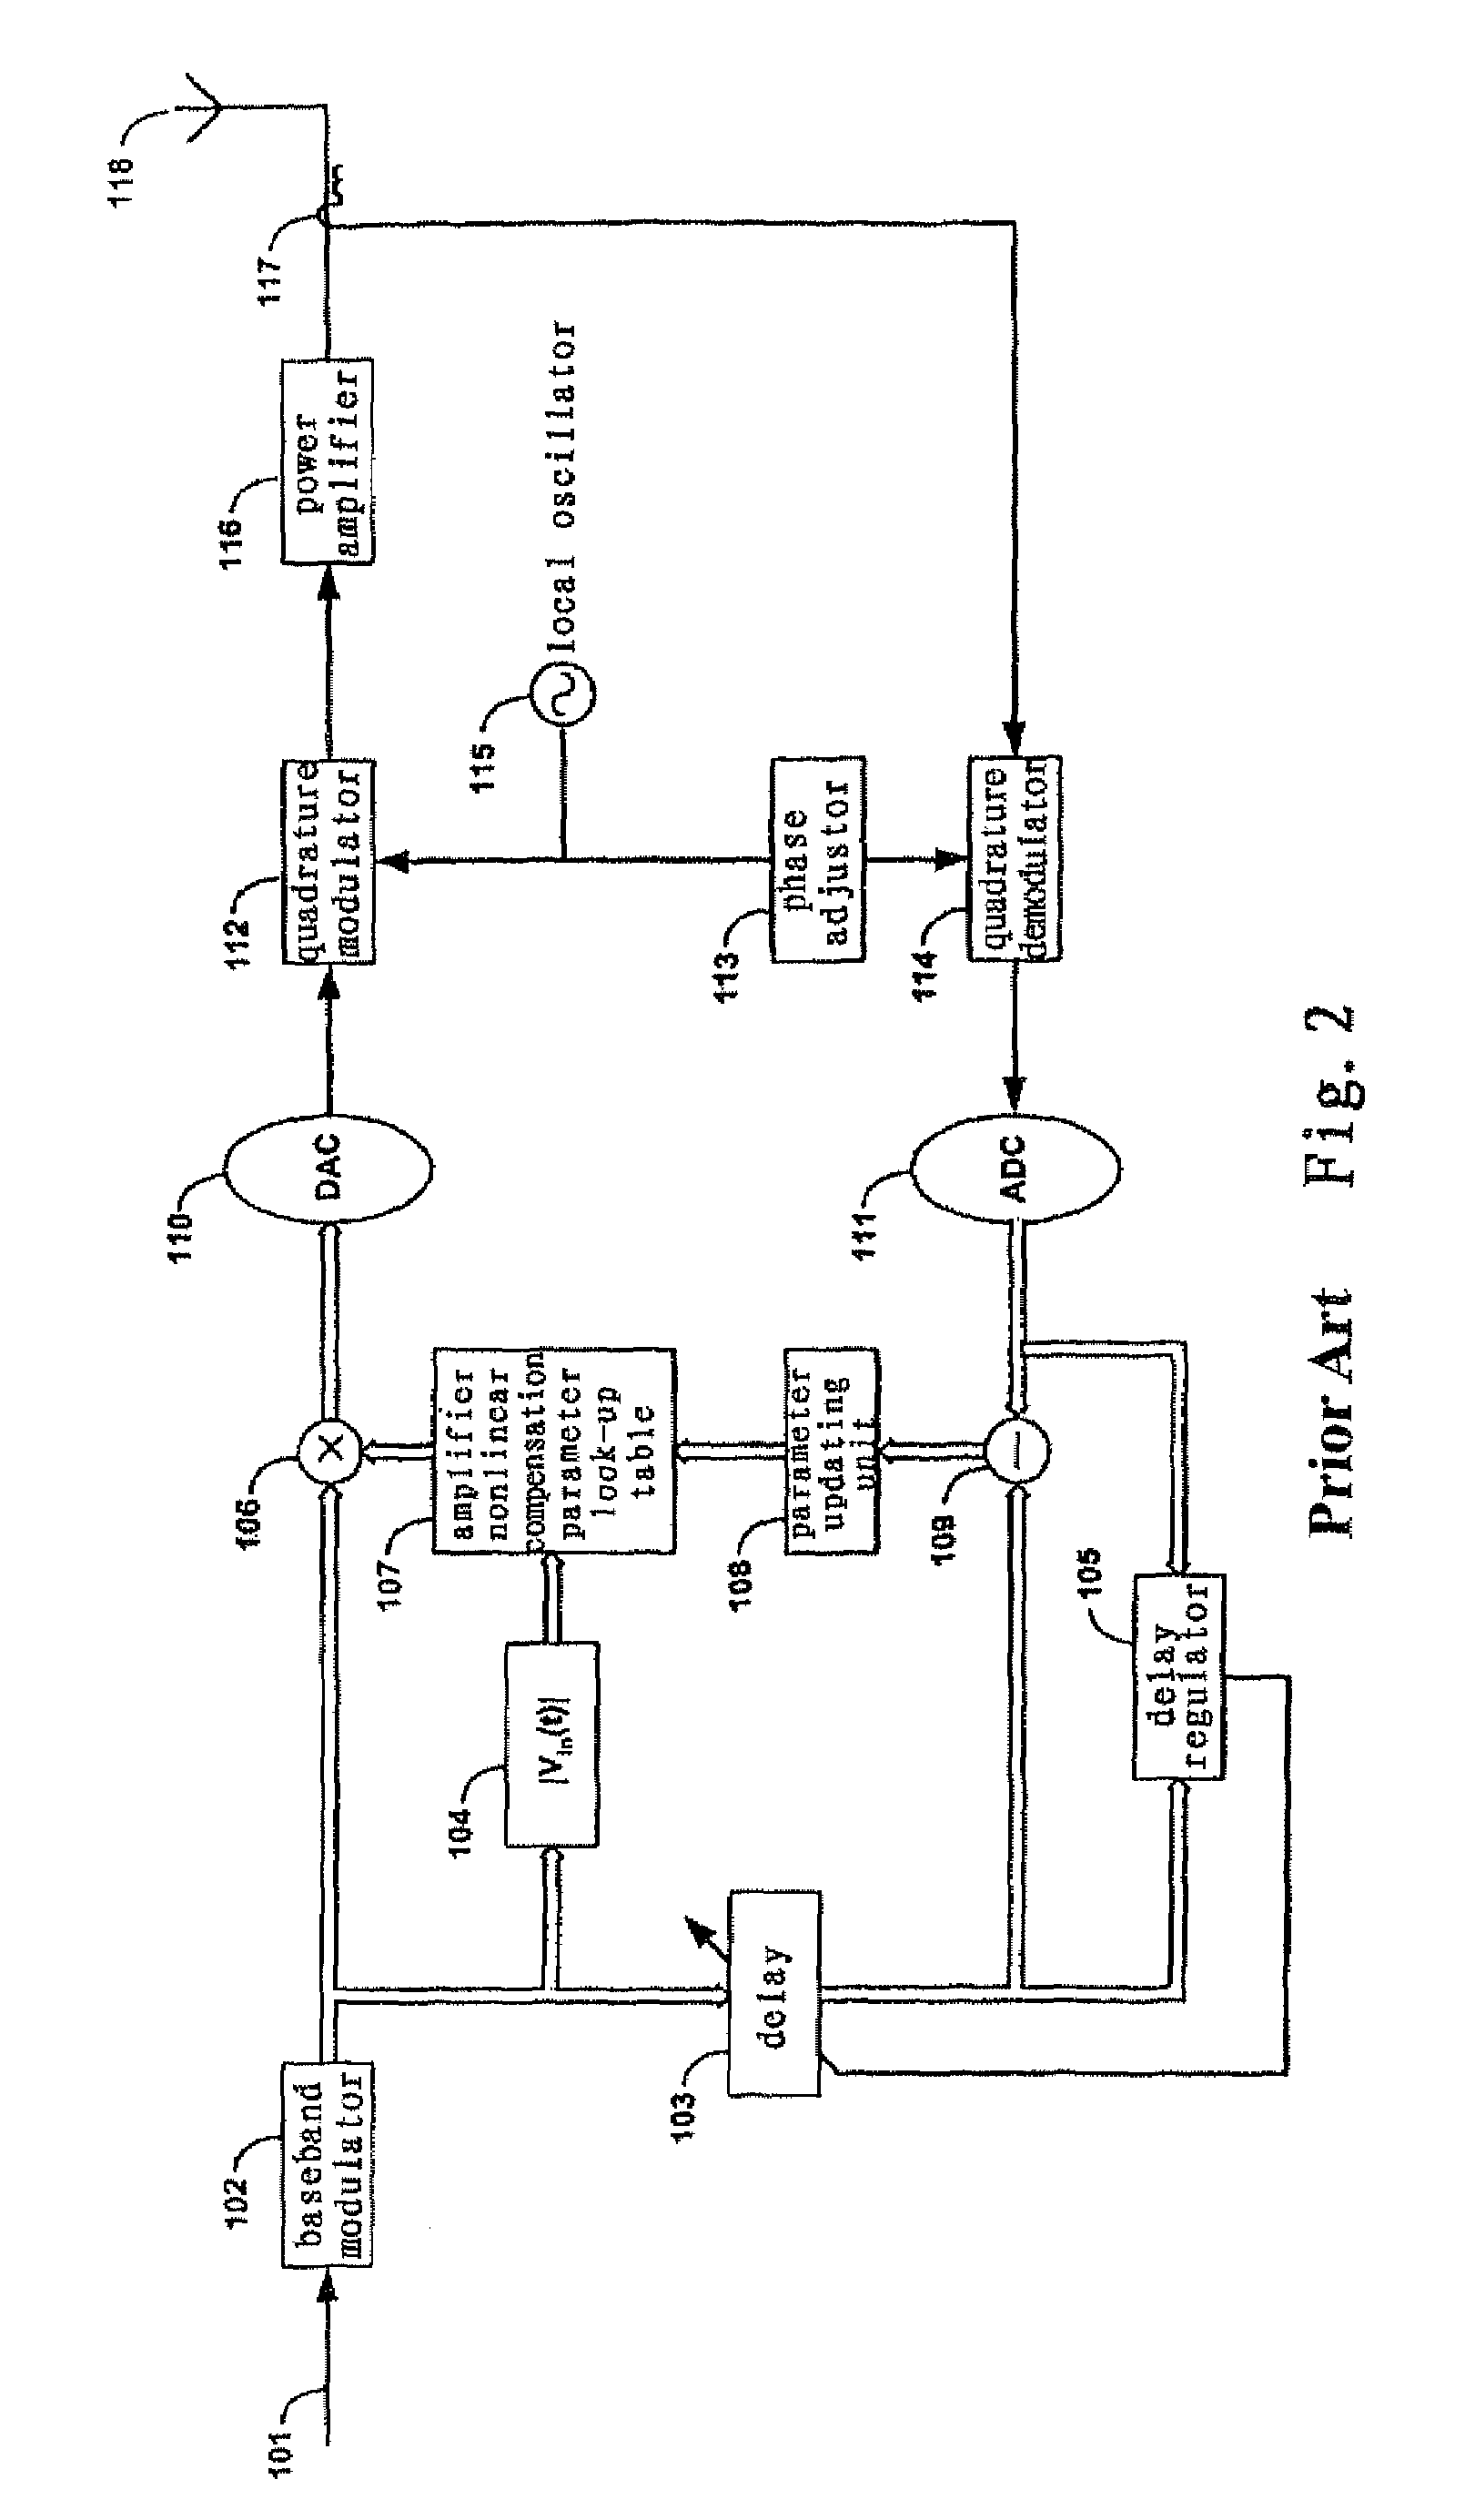 Method and system for broadband predistortion linearization